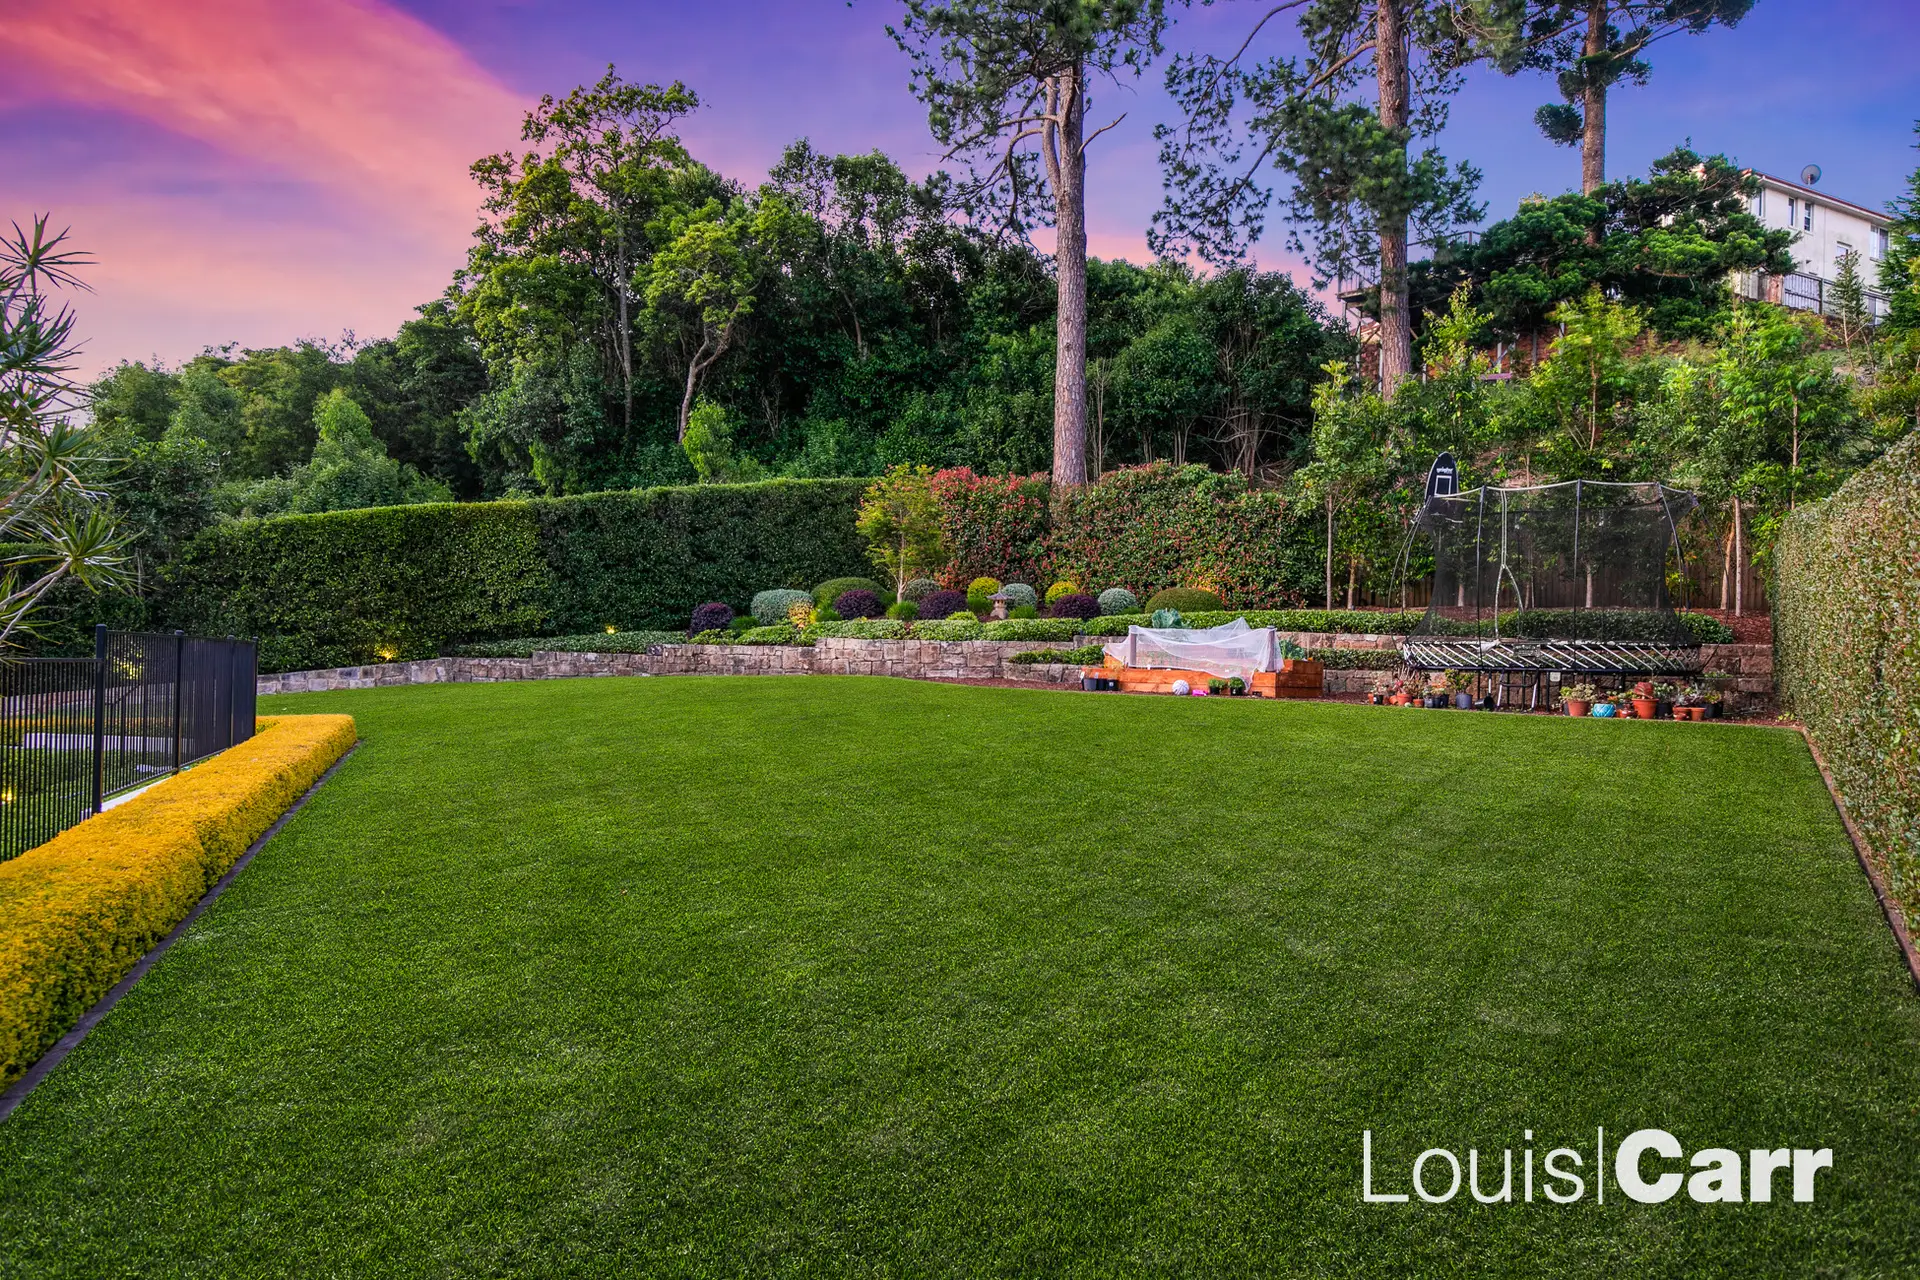 Photo #17: 23 Doris Hirst Place, West Pennant Hills - Sold by Louis Carr Real Estate